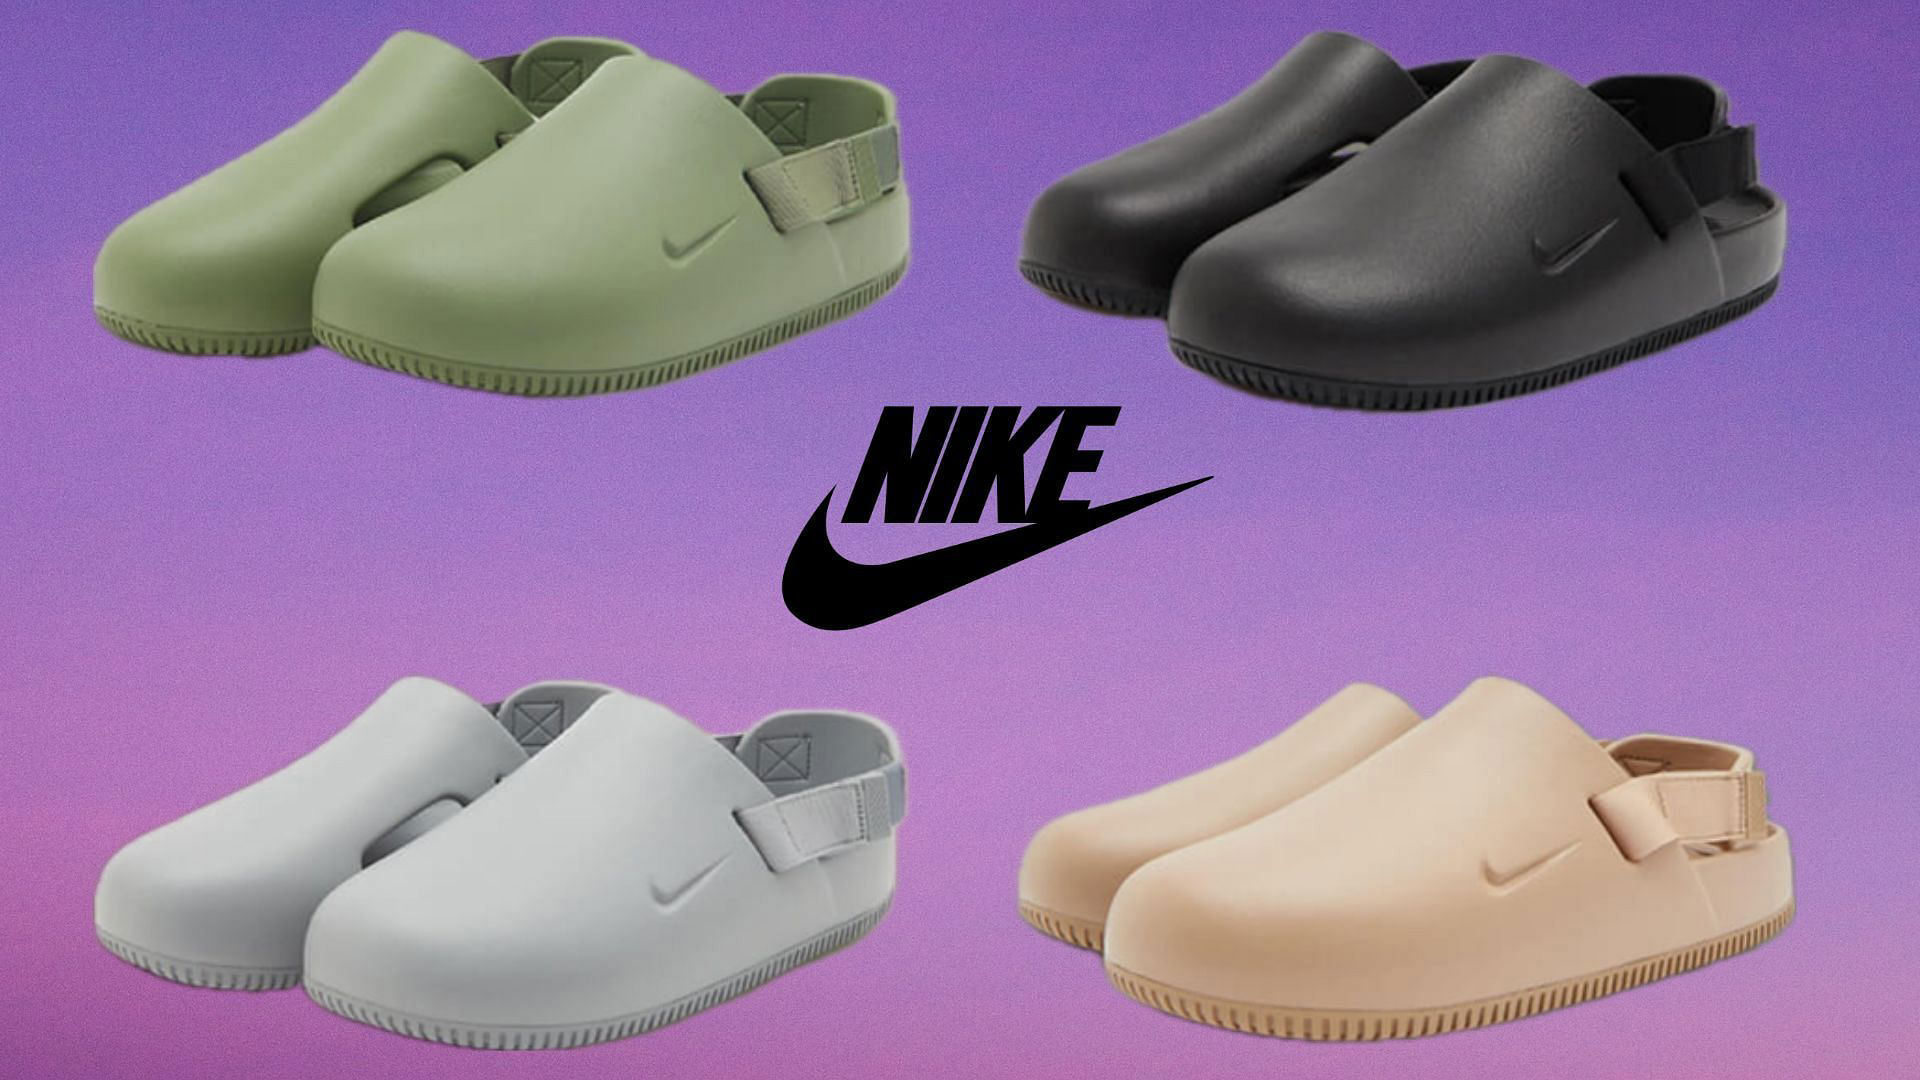 Nike Calm Mule colorways: Where to get, price, and more details explored